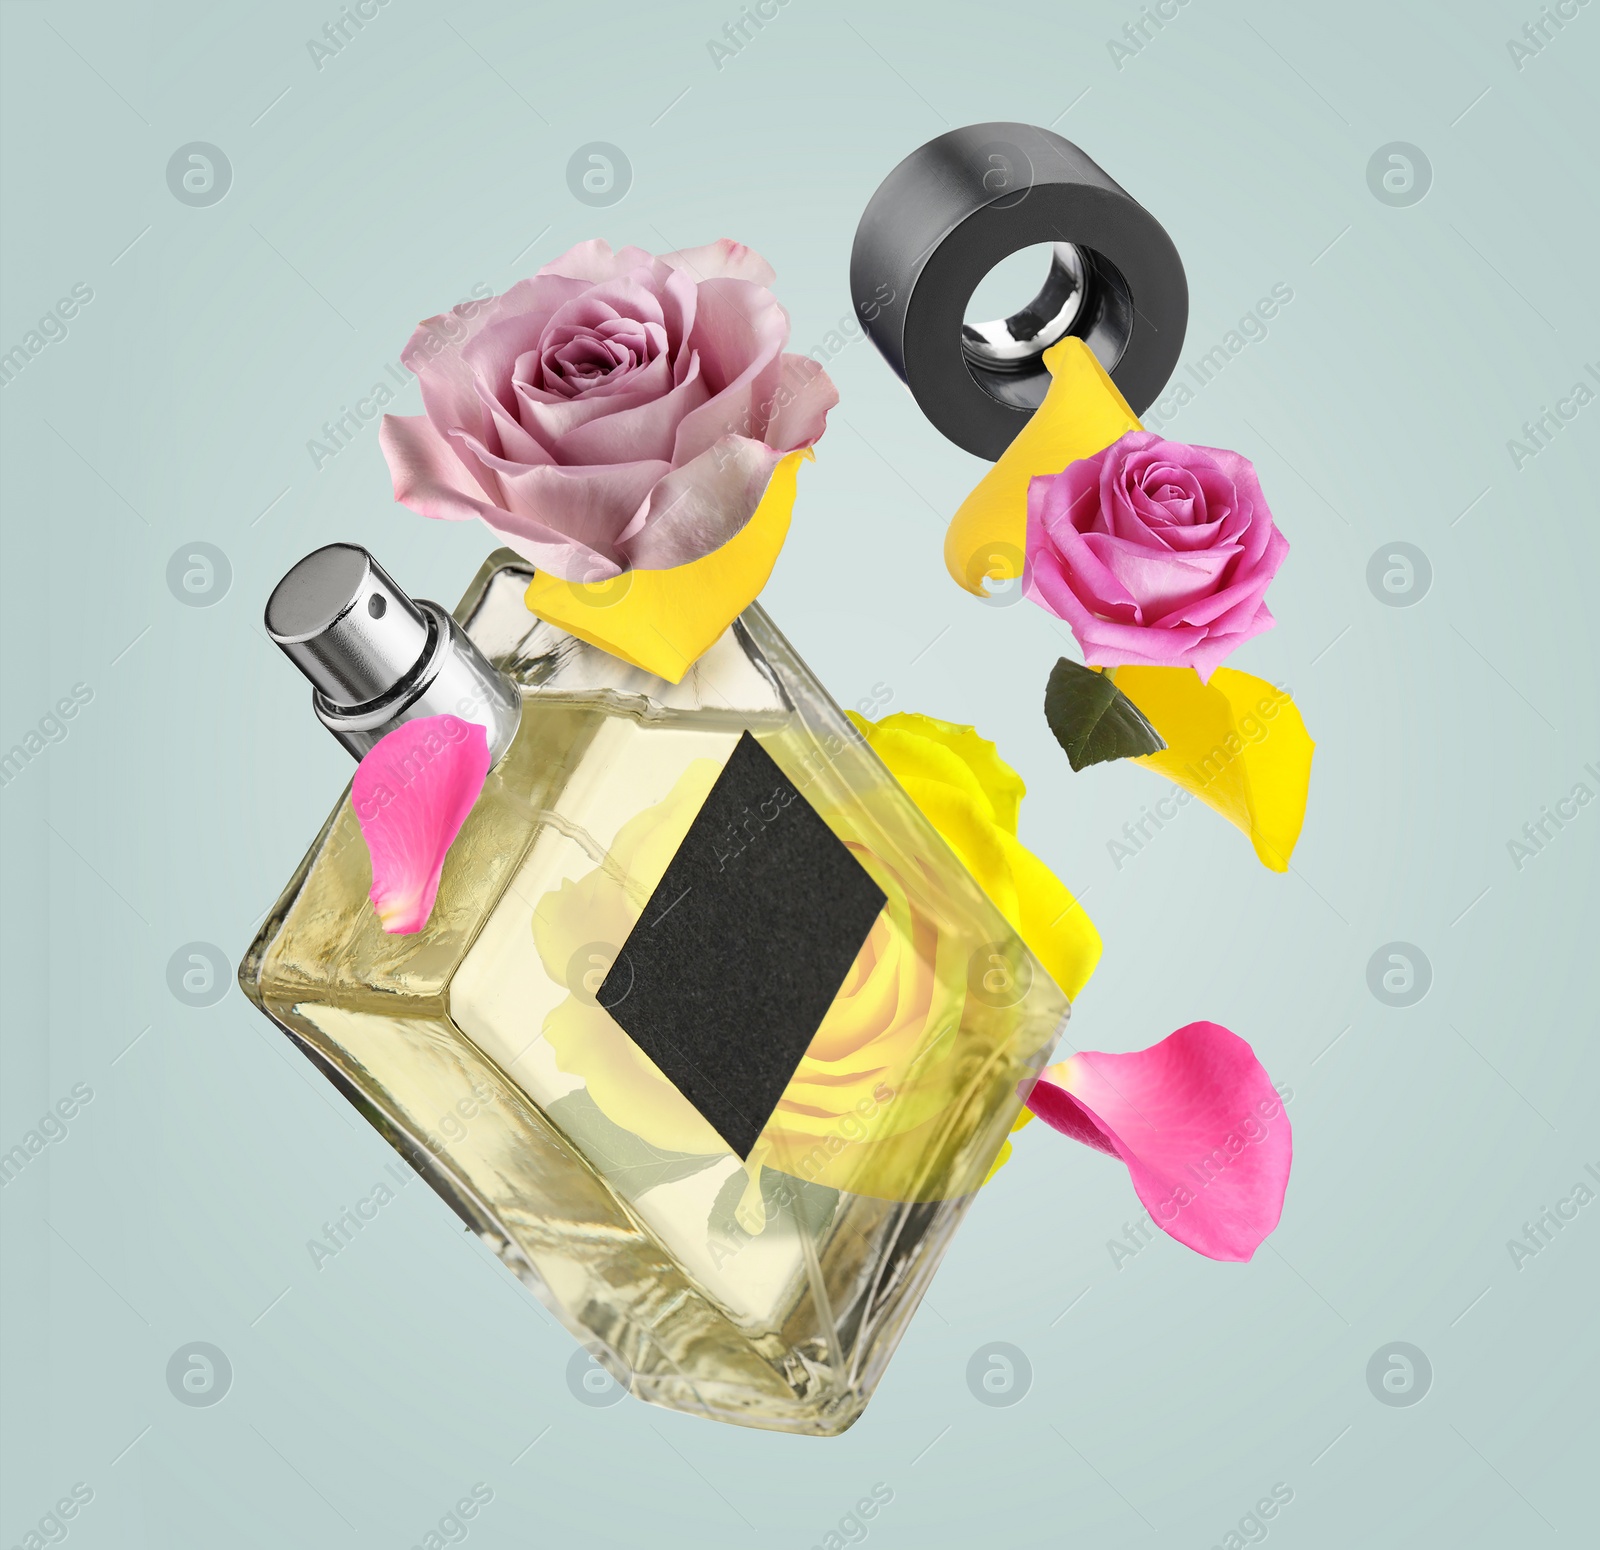 Image of Bottle of perfume and roses in air on grey background. Flower fragrance